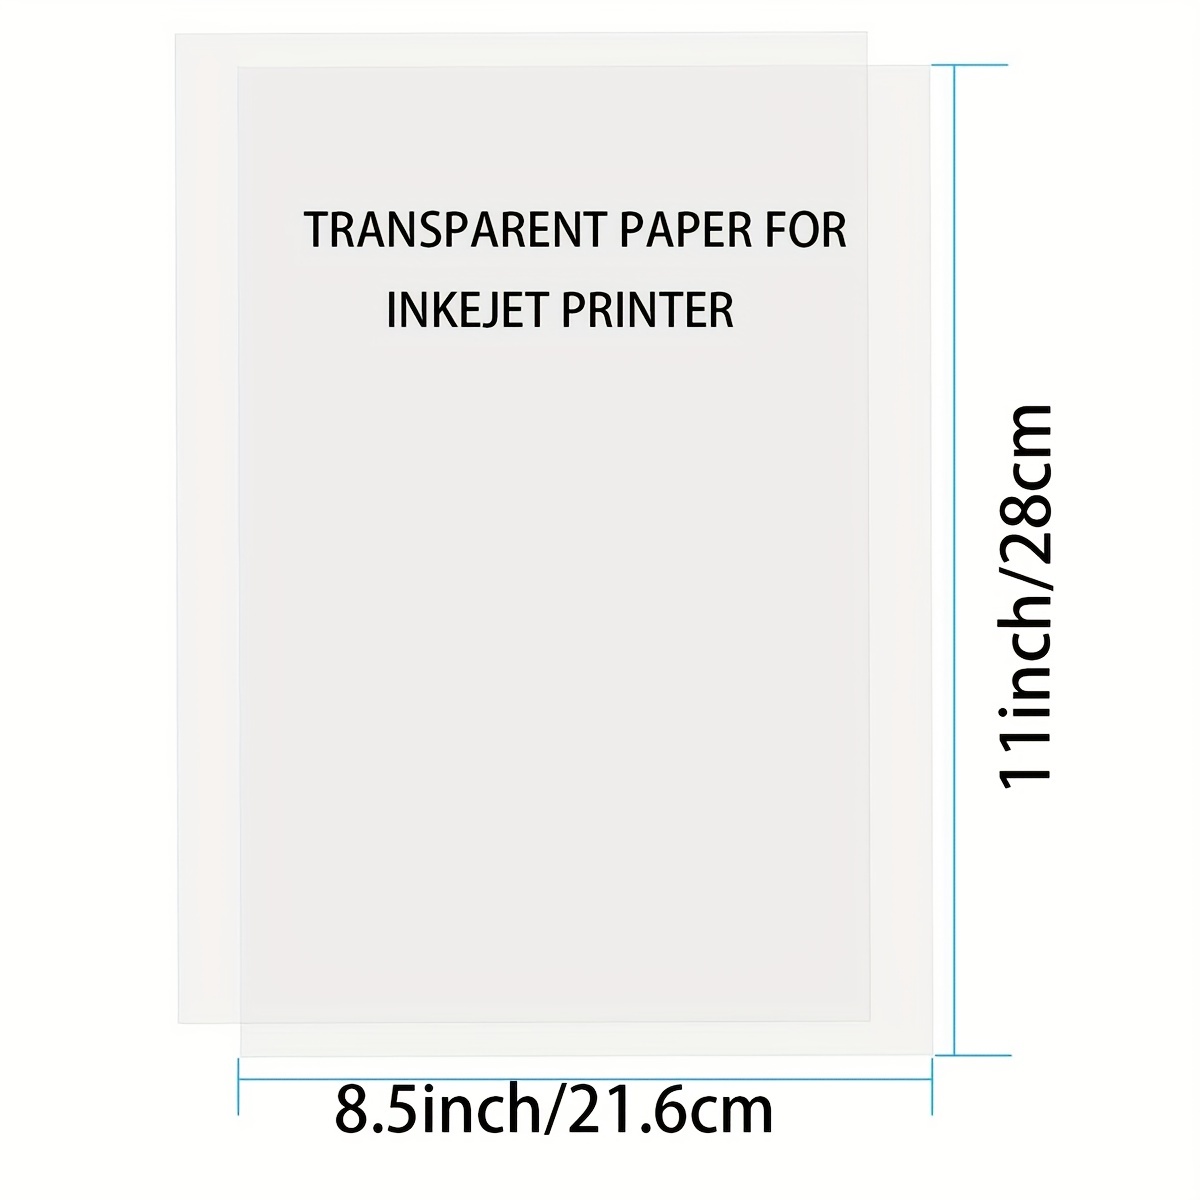 100% Clear Inkjet Transparency Film - 8.5x11 Inches (30 Sheets